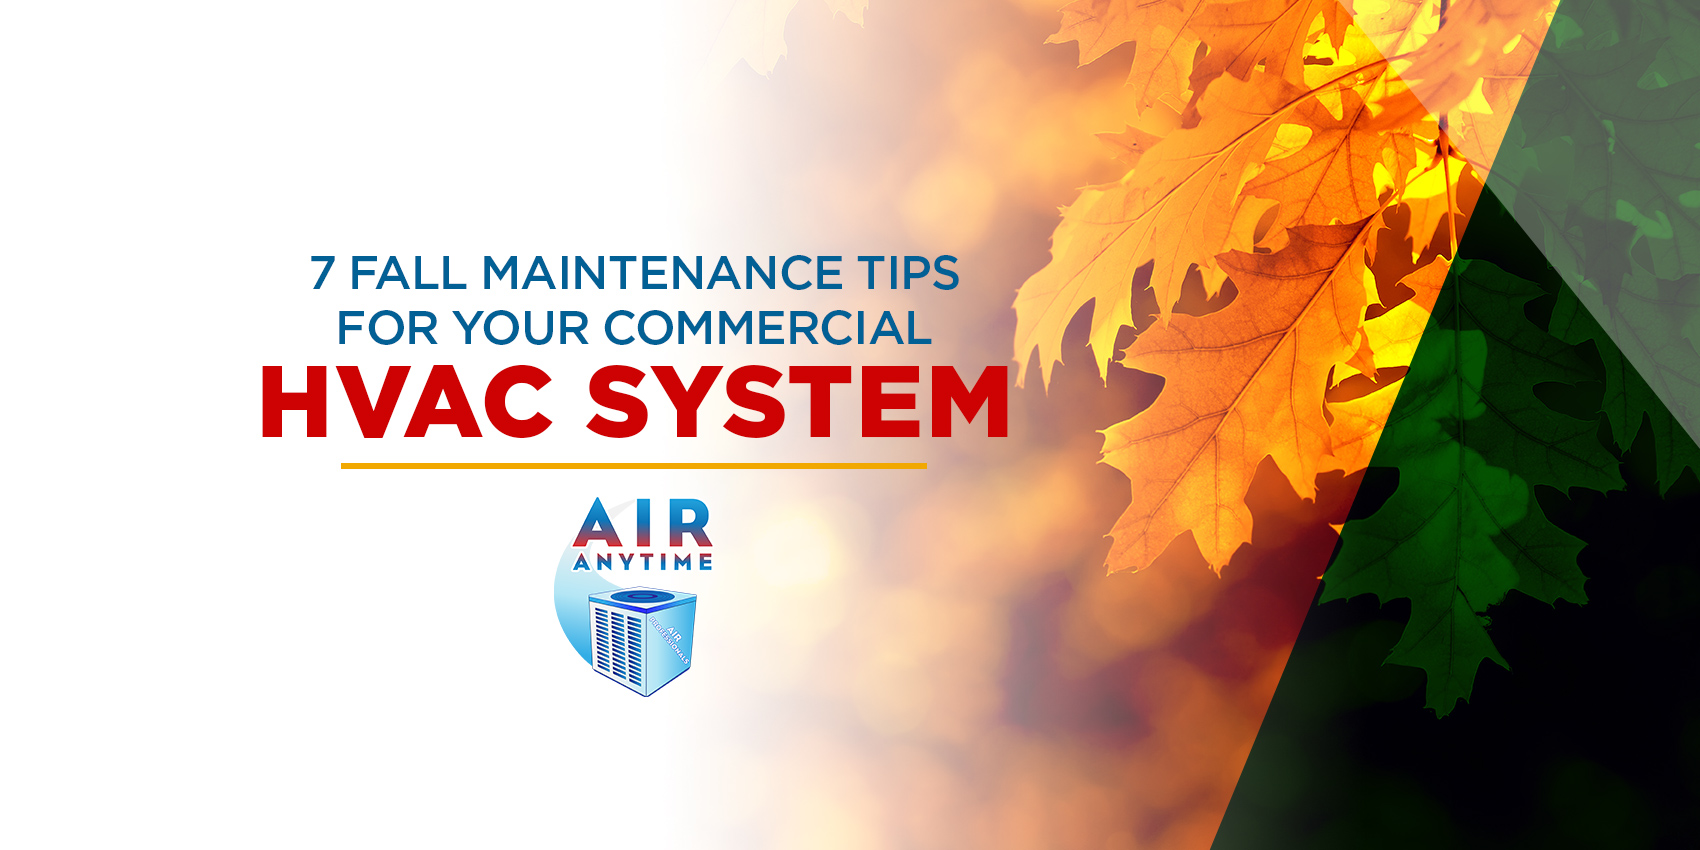 Maintenance Tips for Your Commercial HVAC System